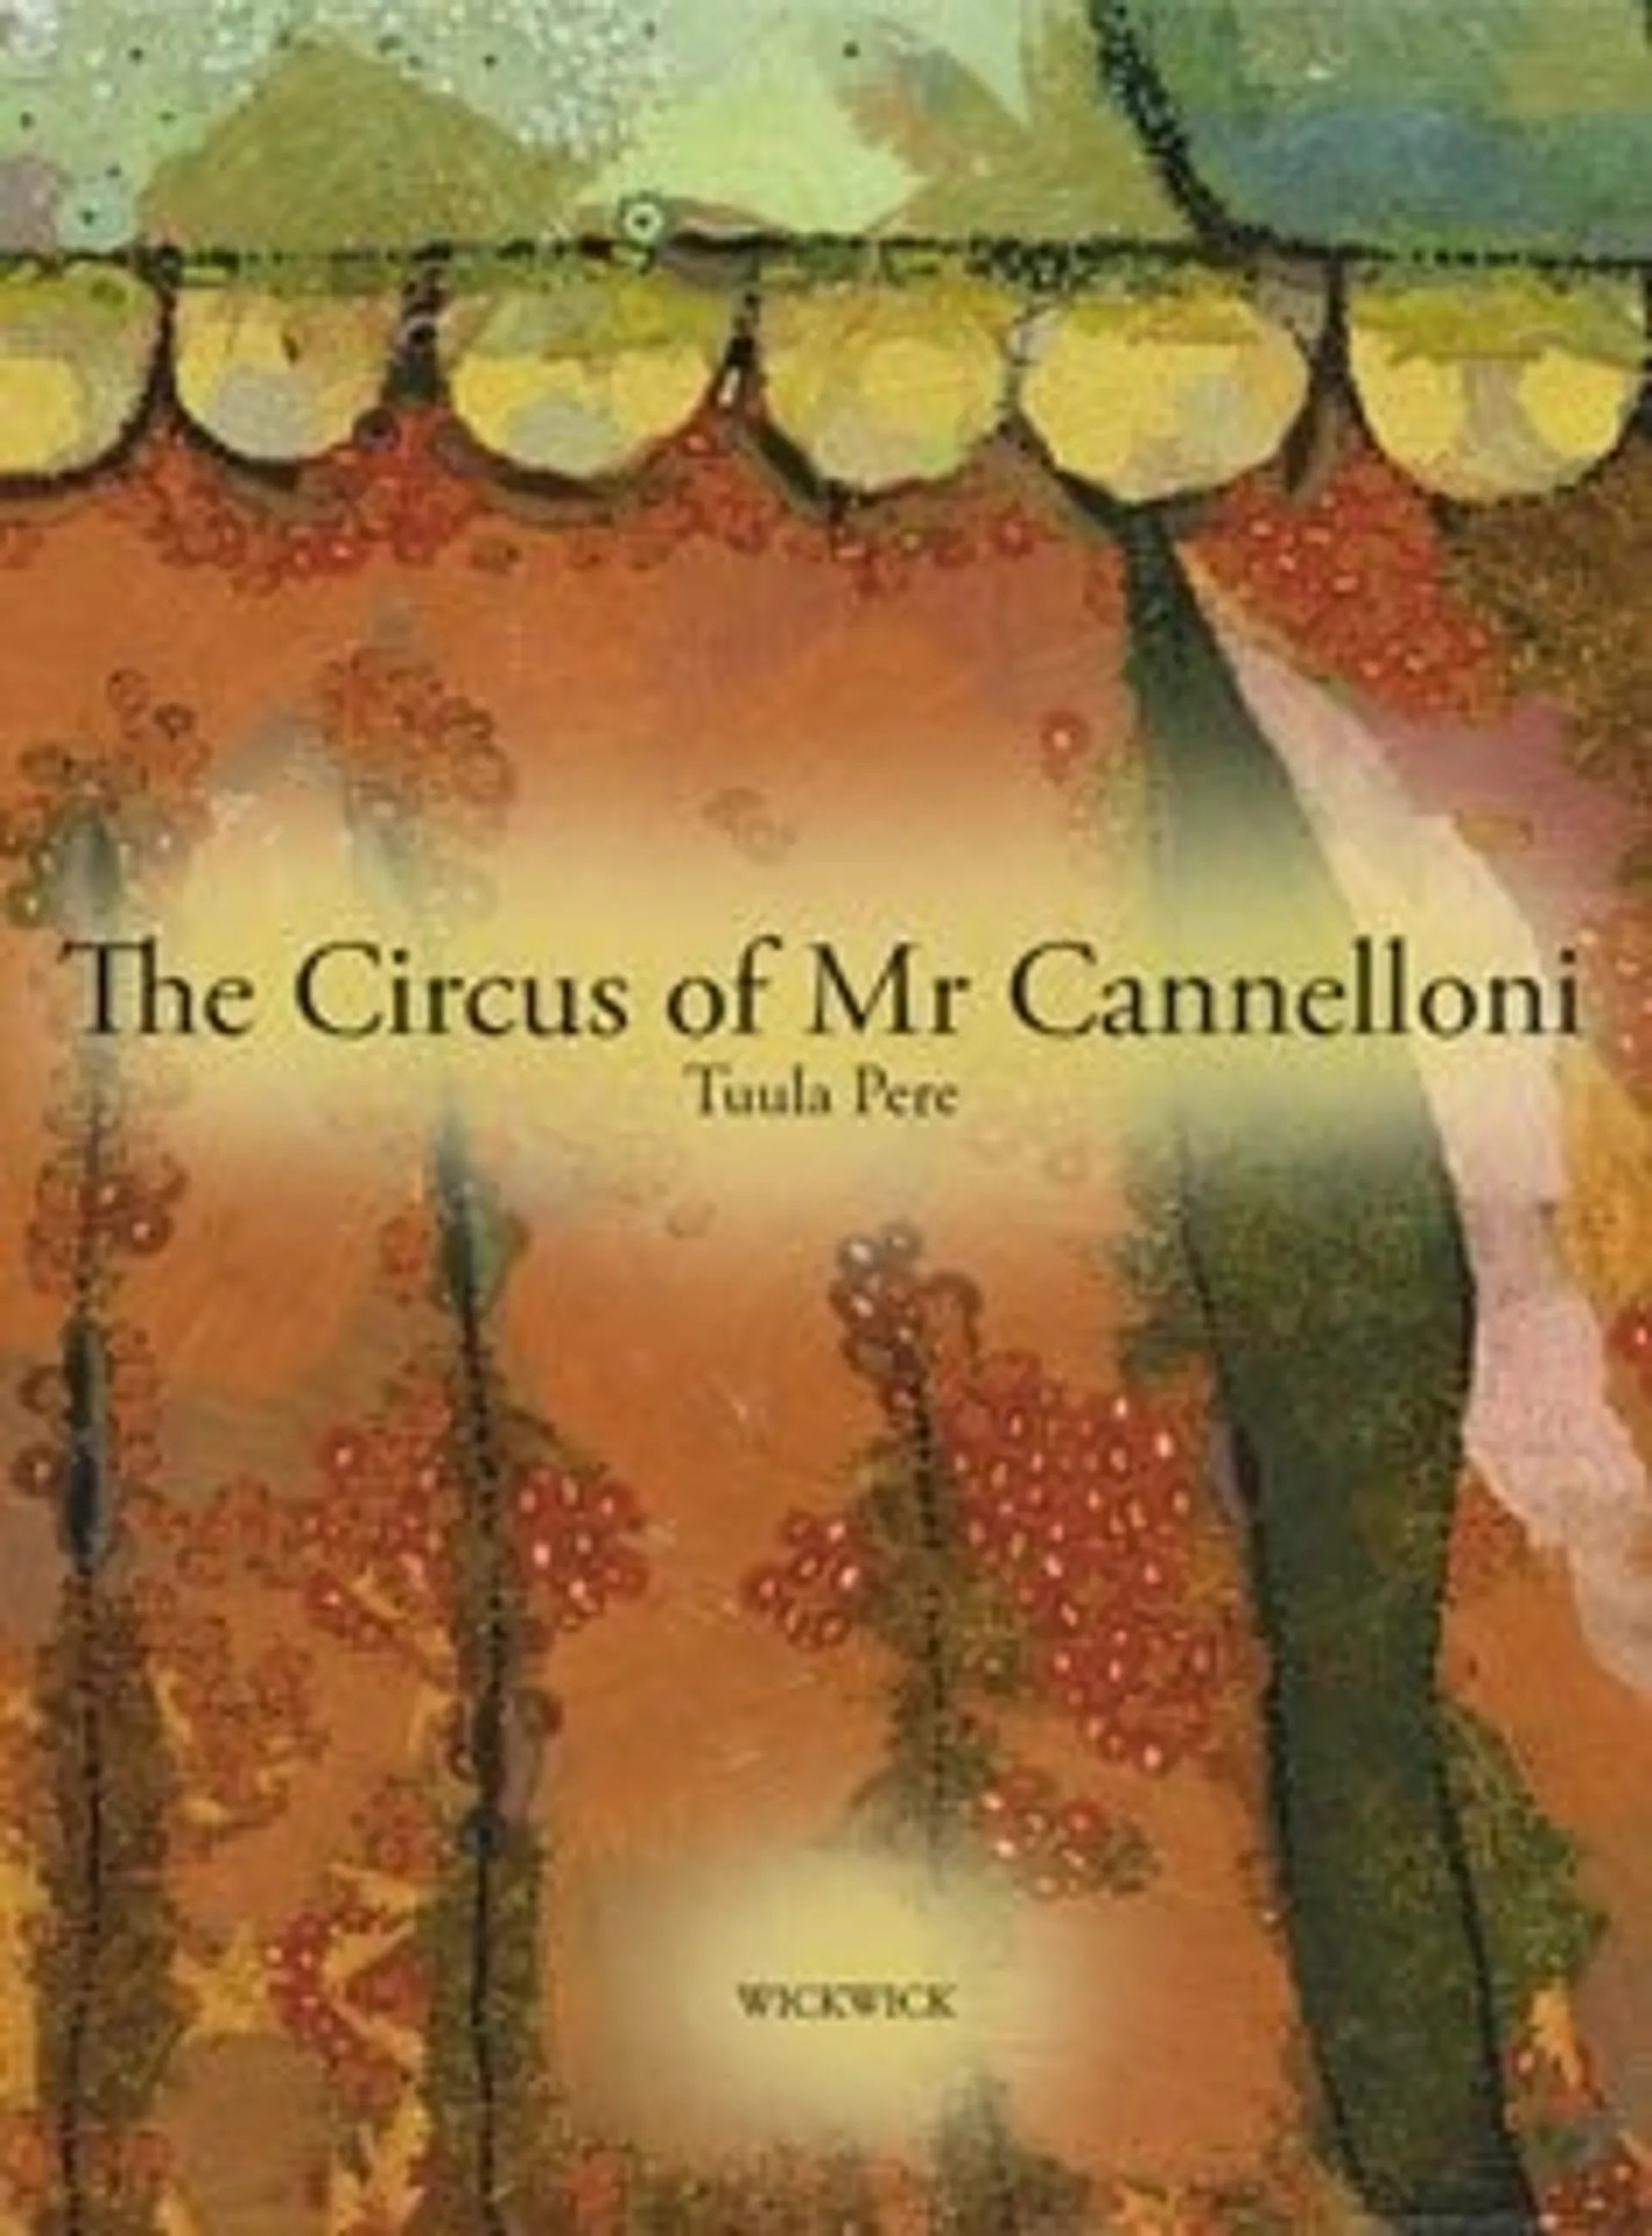 The Circus of Mr Cannelloni